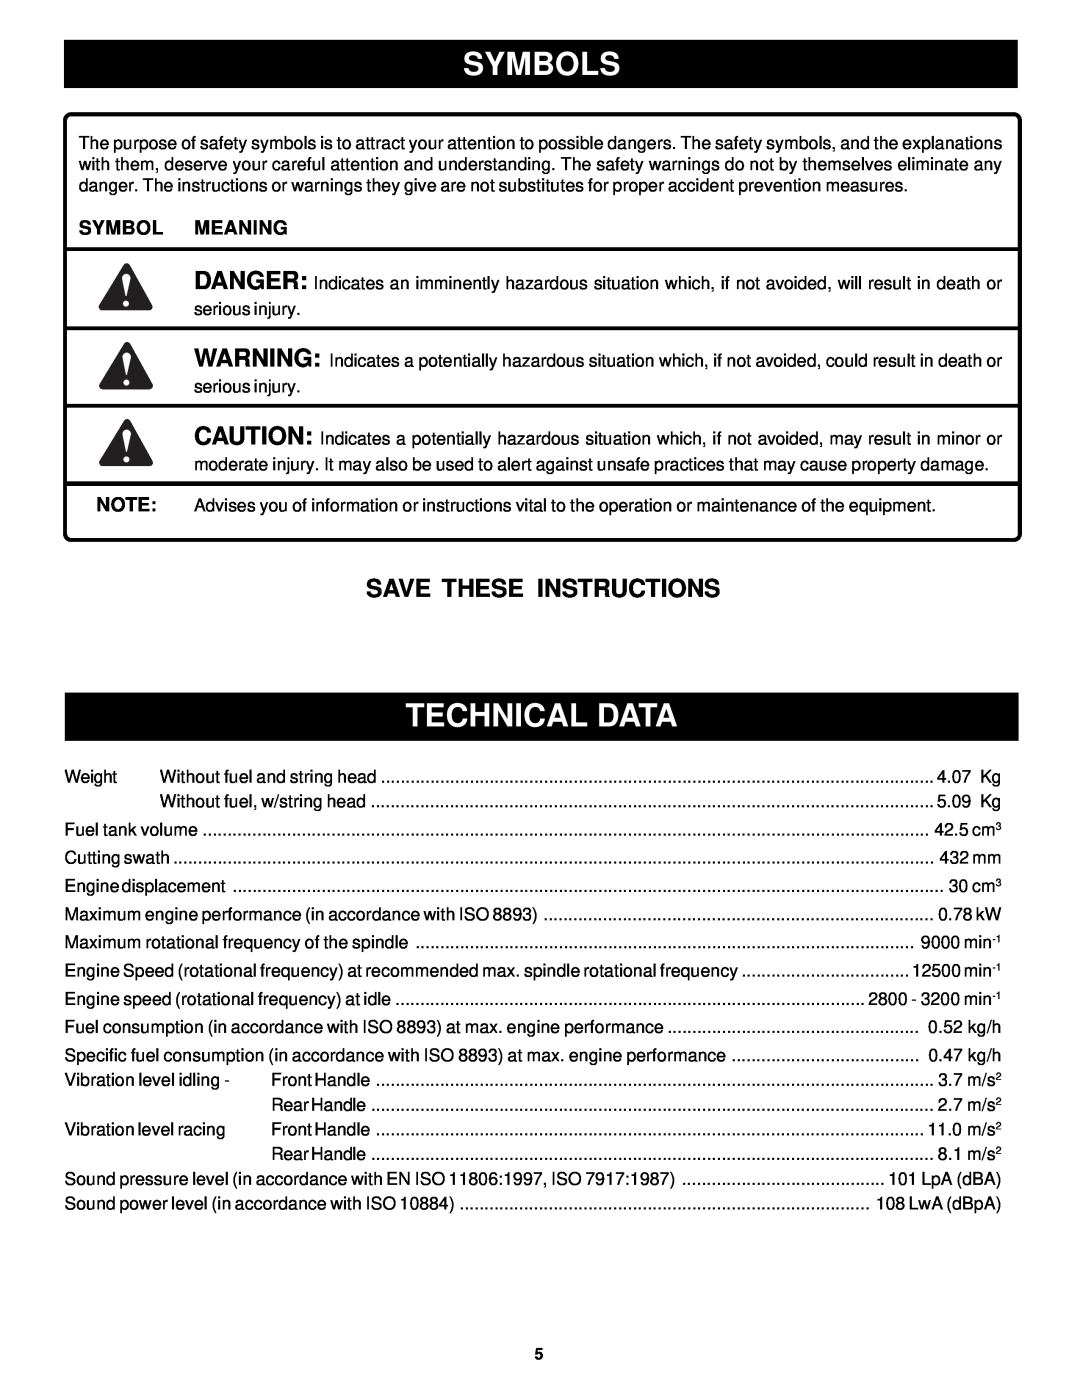 Ryobi PLT3043S manual Technical Data, Symbols, Save These Instructions, Symbol Meaning 